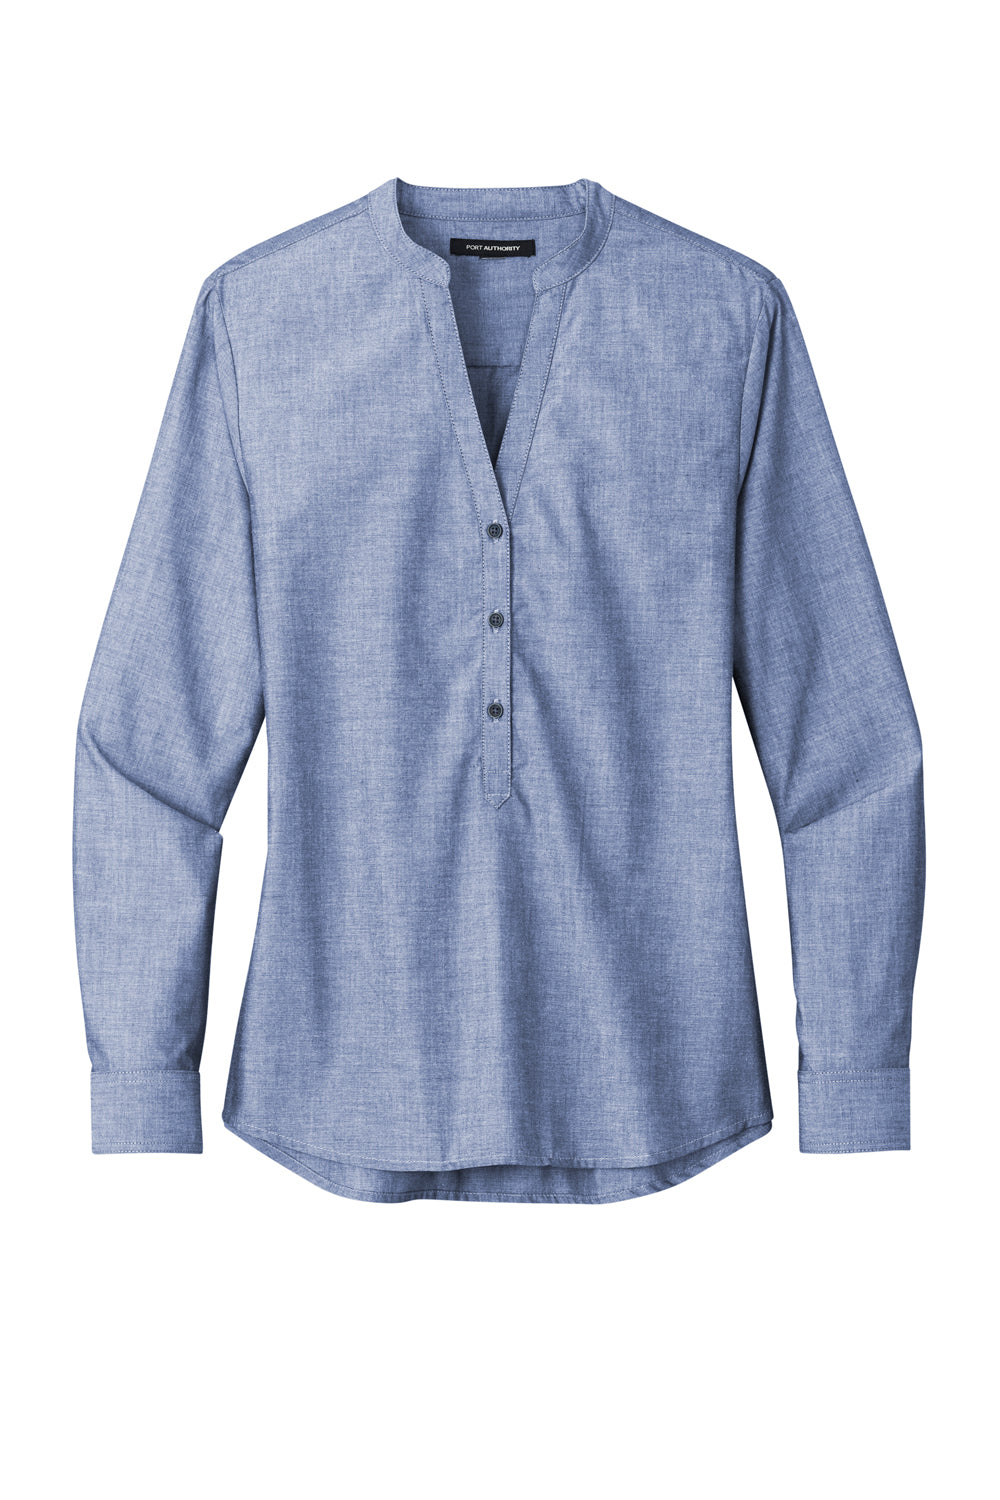 Port Authority LW382 Chambray Easy Care Long Sleeve Button Down Shirt Moonlight Blue Flat Front